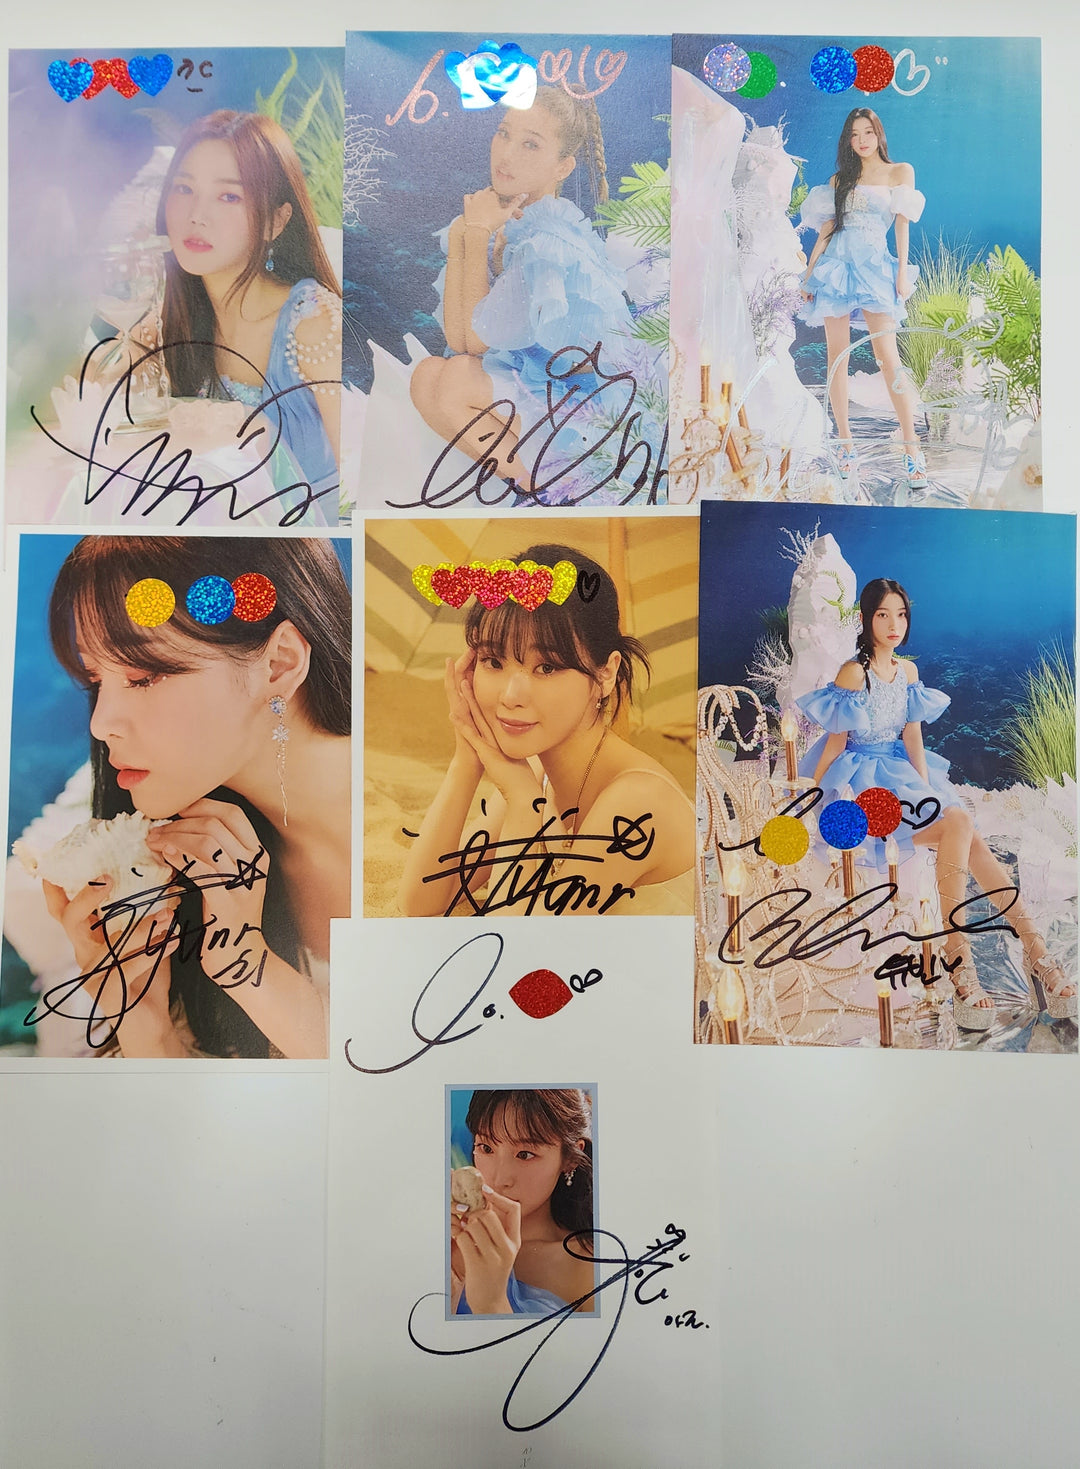 Oh My Girls "Golden Hourglass" - A Cut Page From Fansign Event Album [23.11.01]